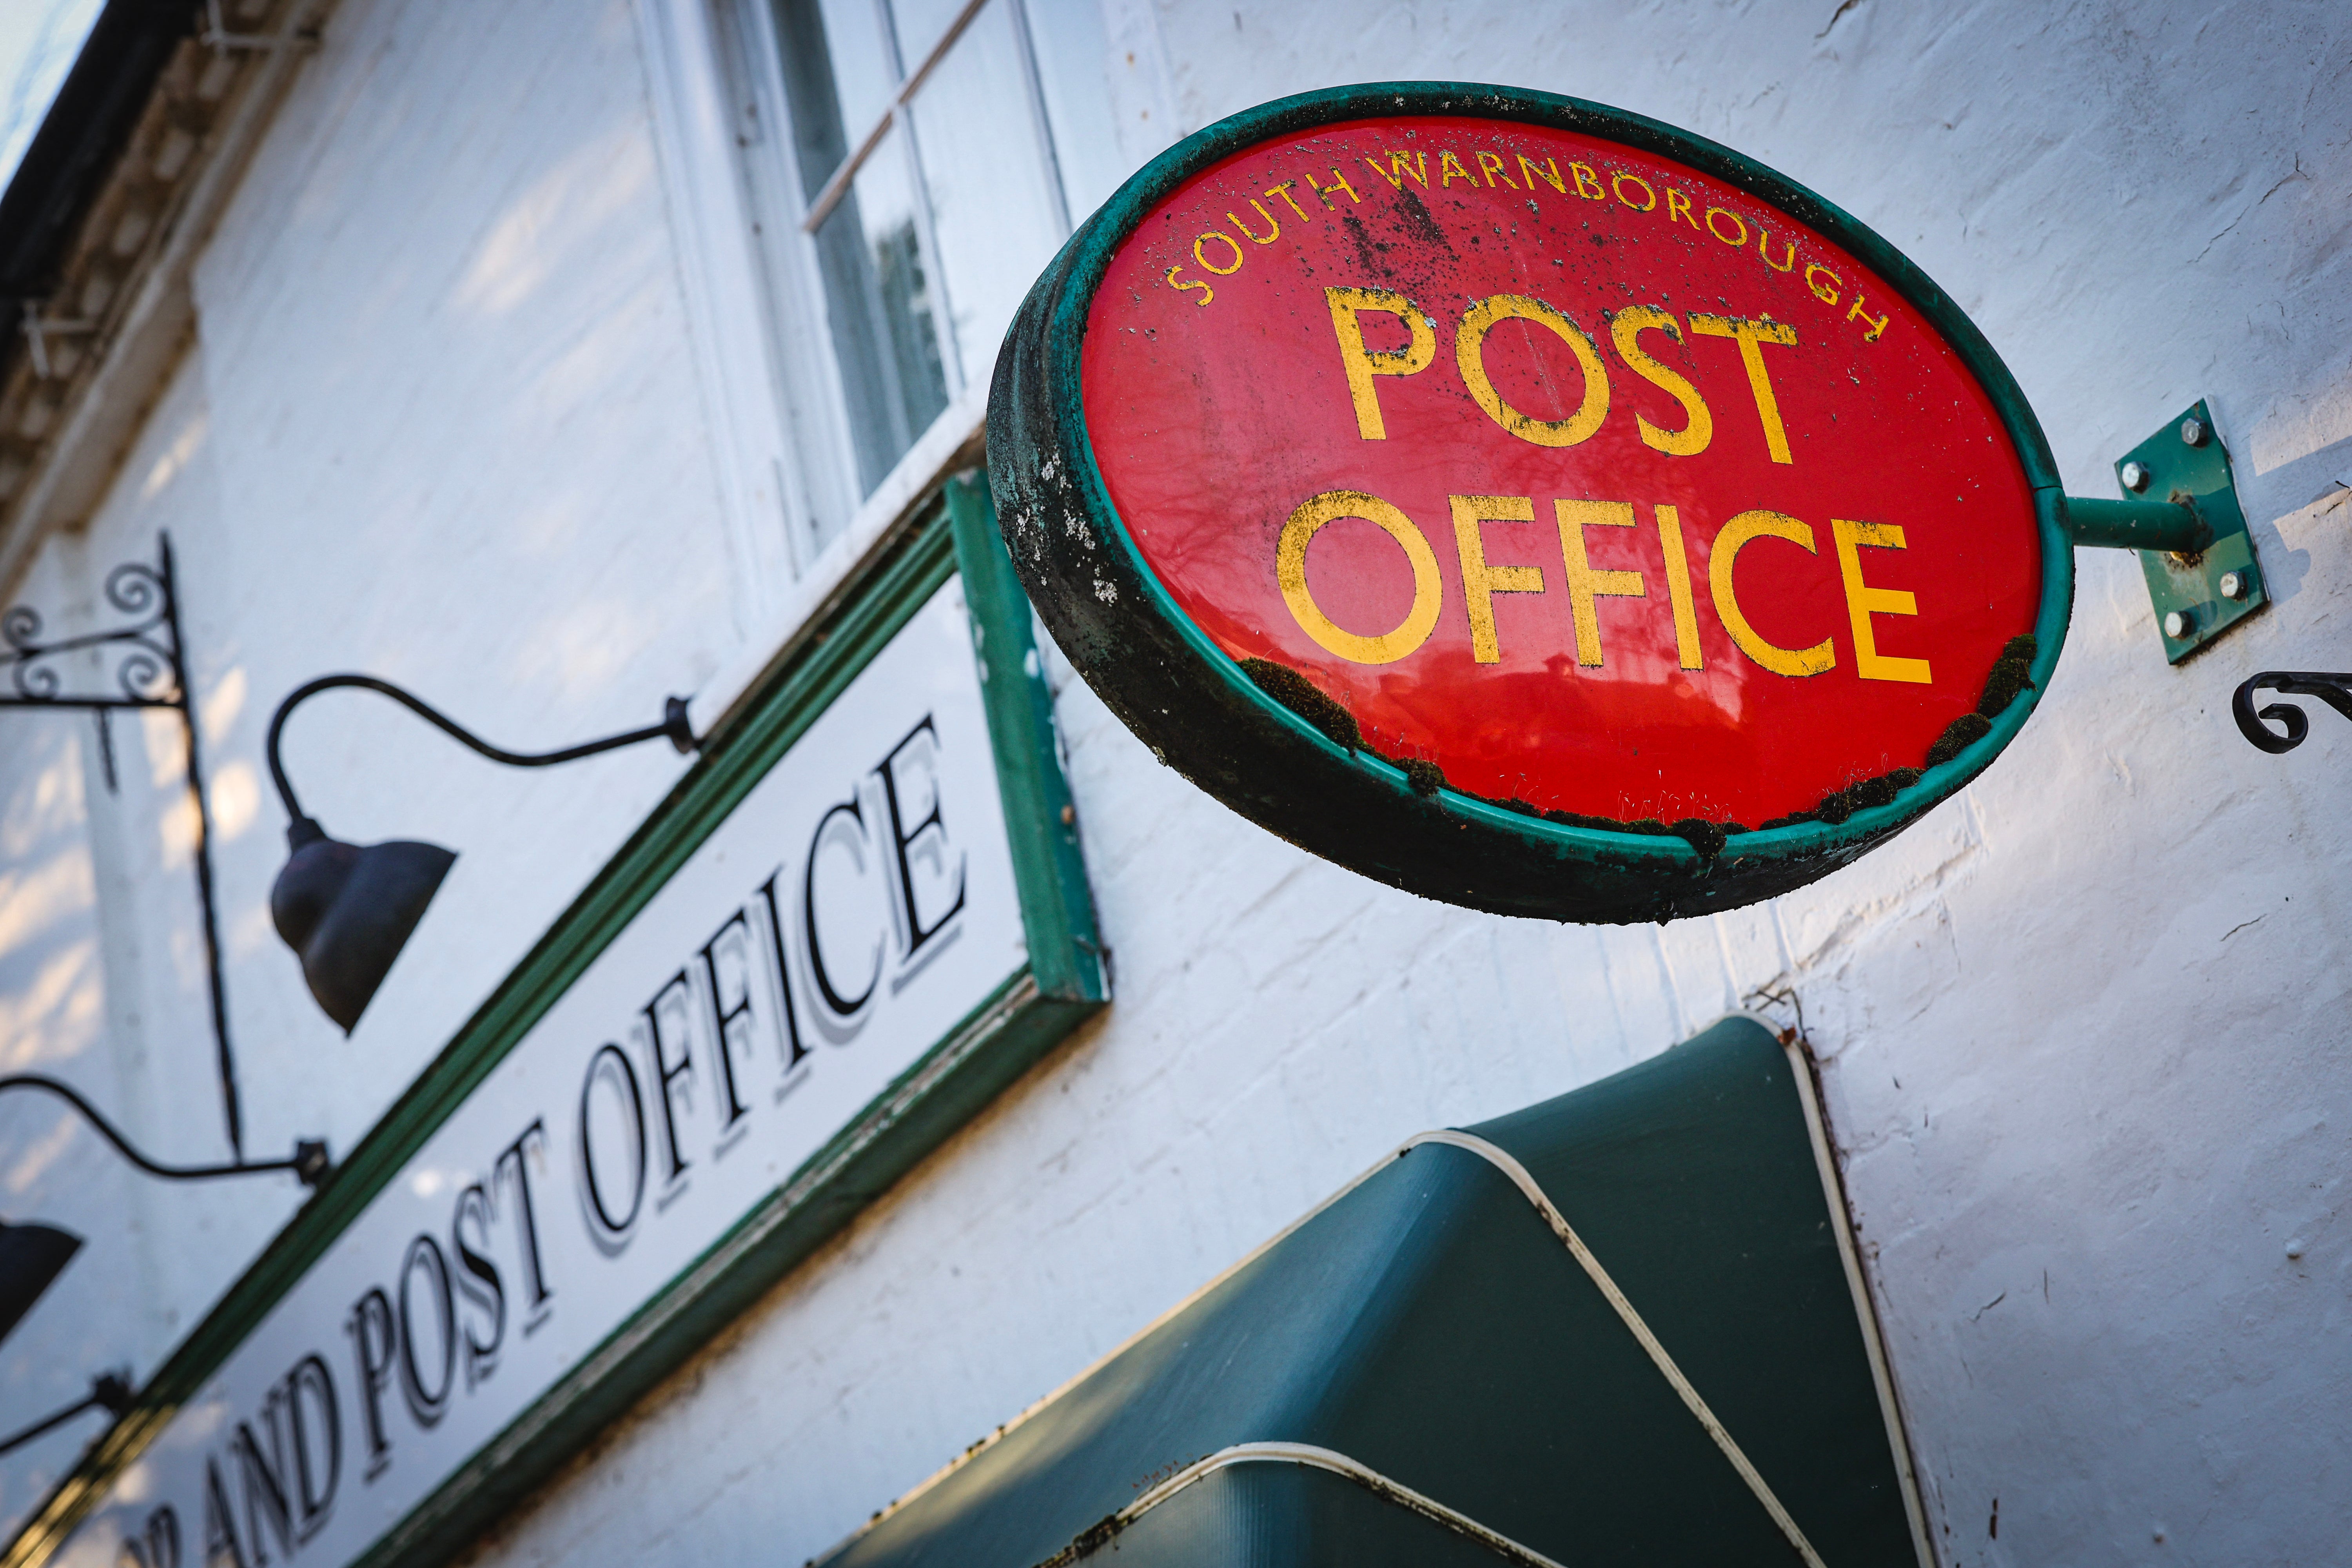 Between 1999 and 2015, the Post Office prosecuted more than 700 of its workers